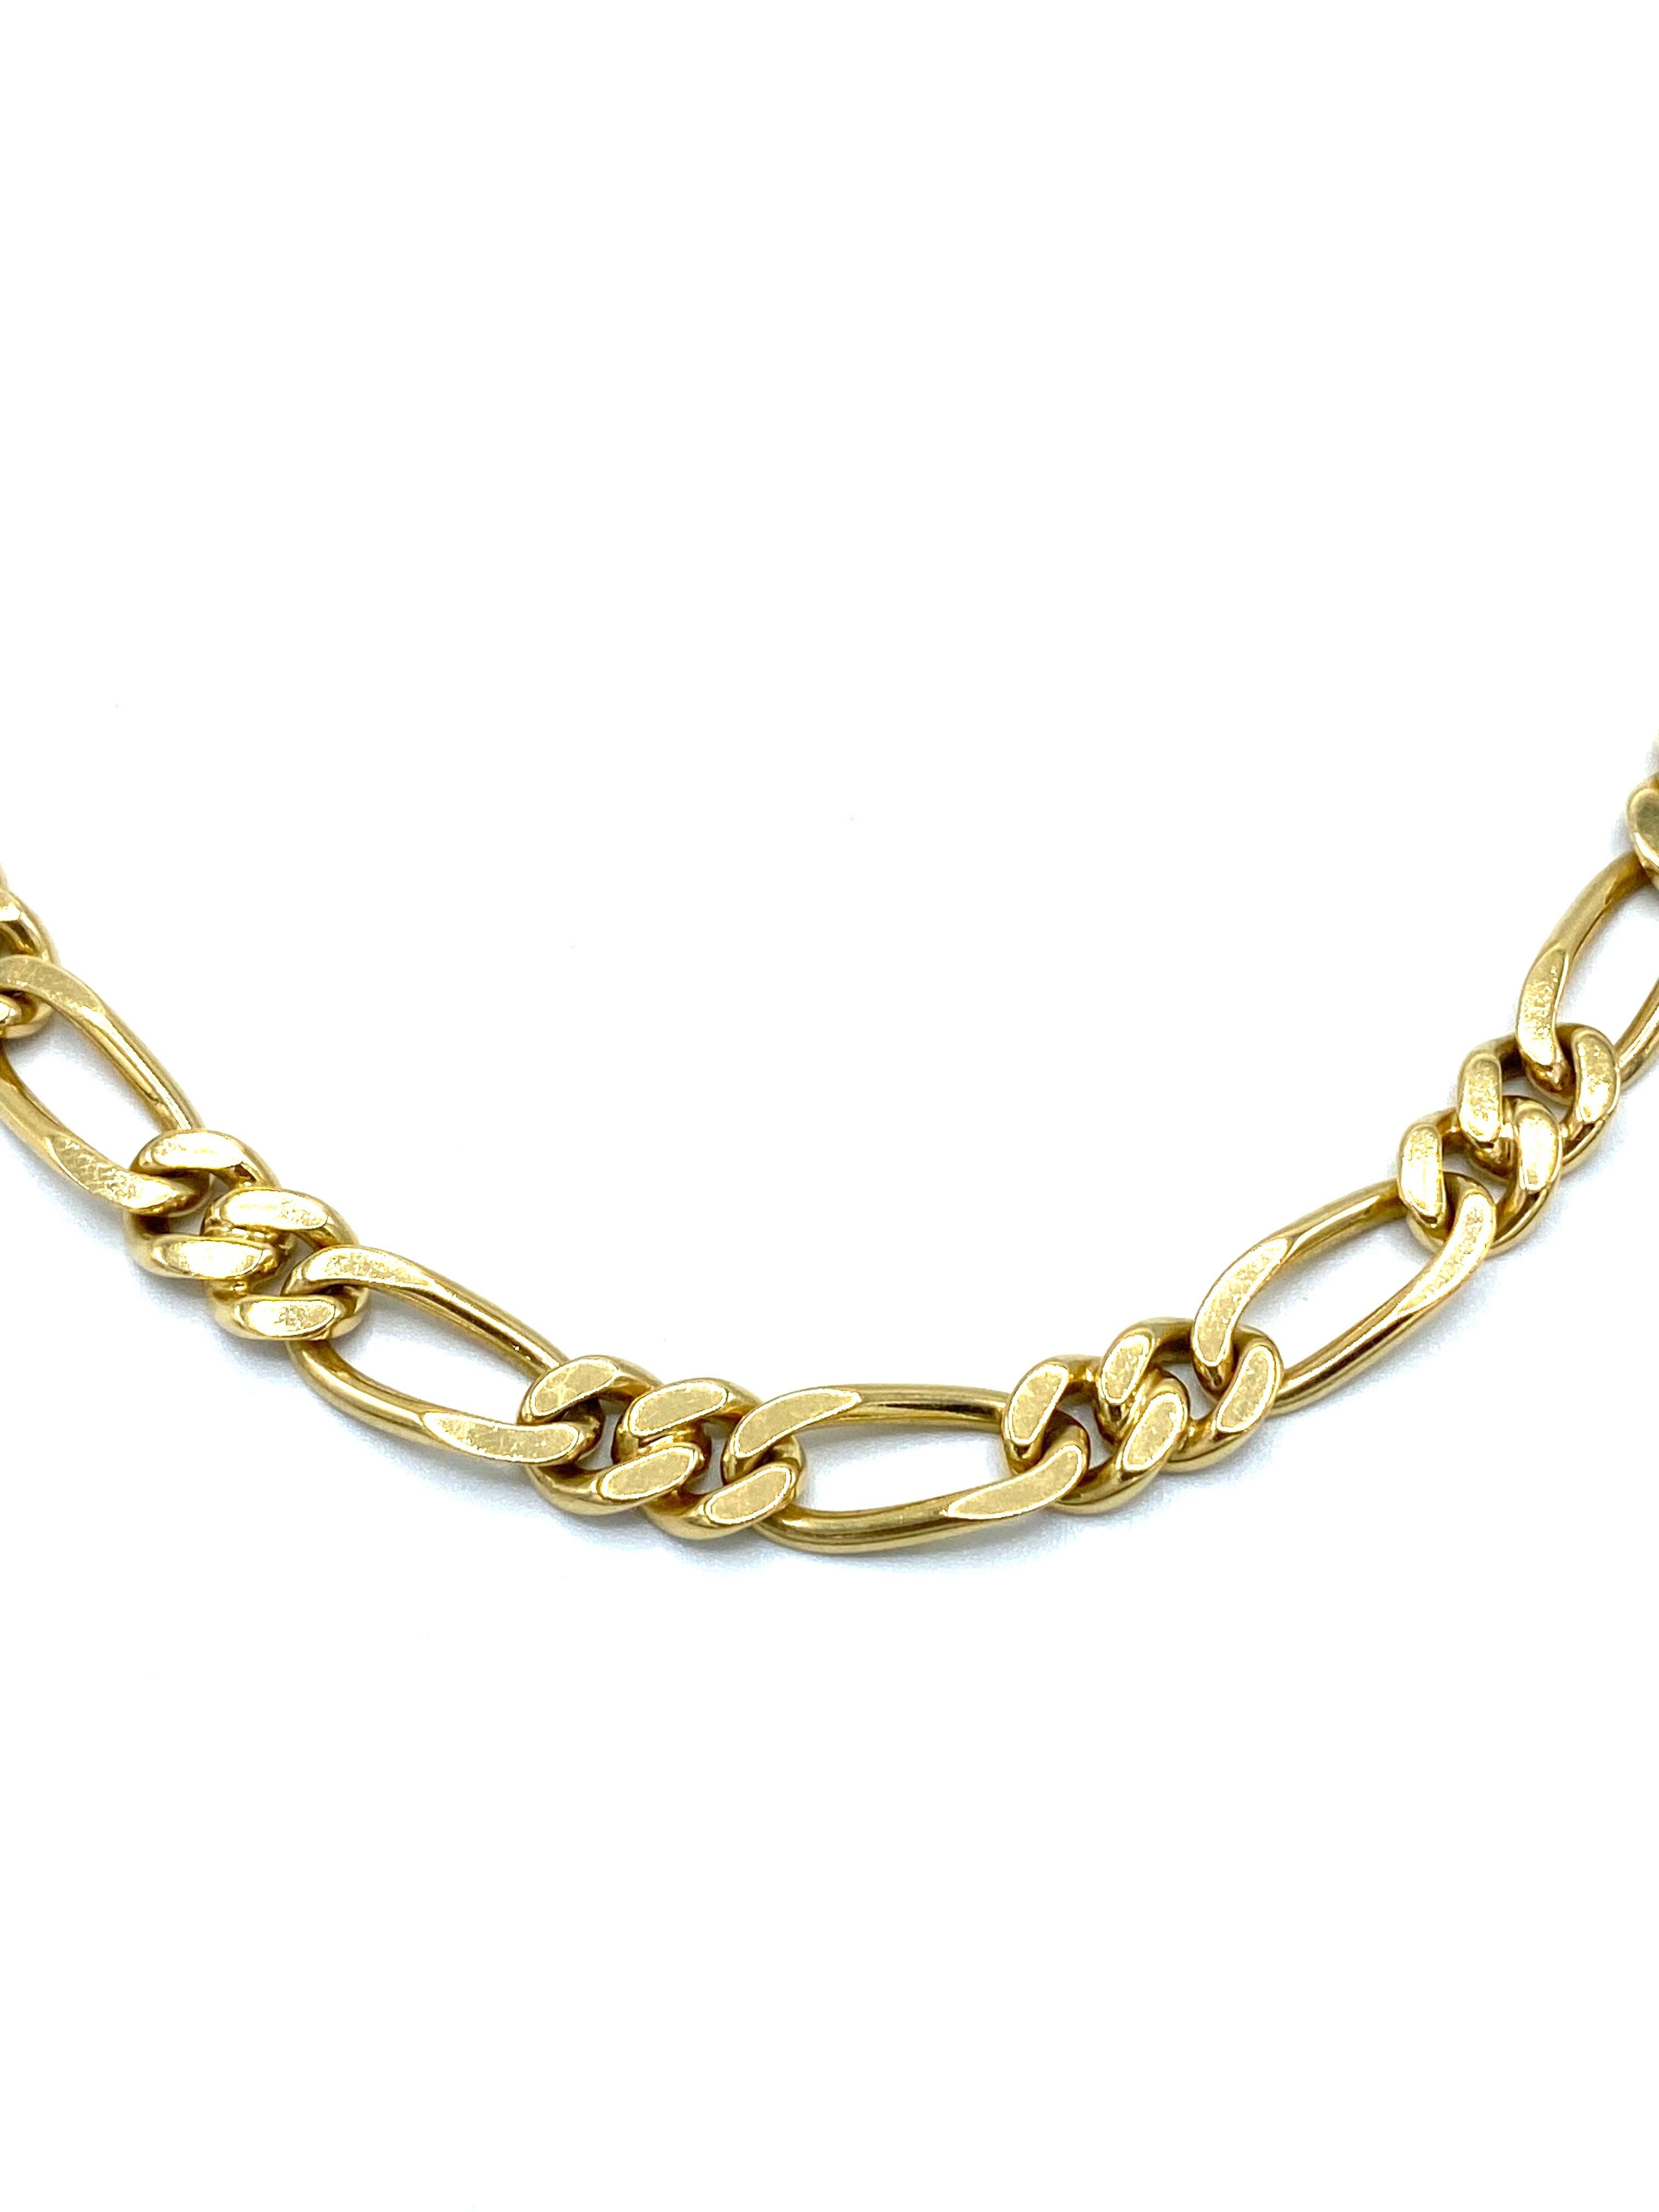 Women's or Men's Vintage Van Cleef and Arpels Yellow Gold Link Chain Necklace